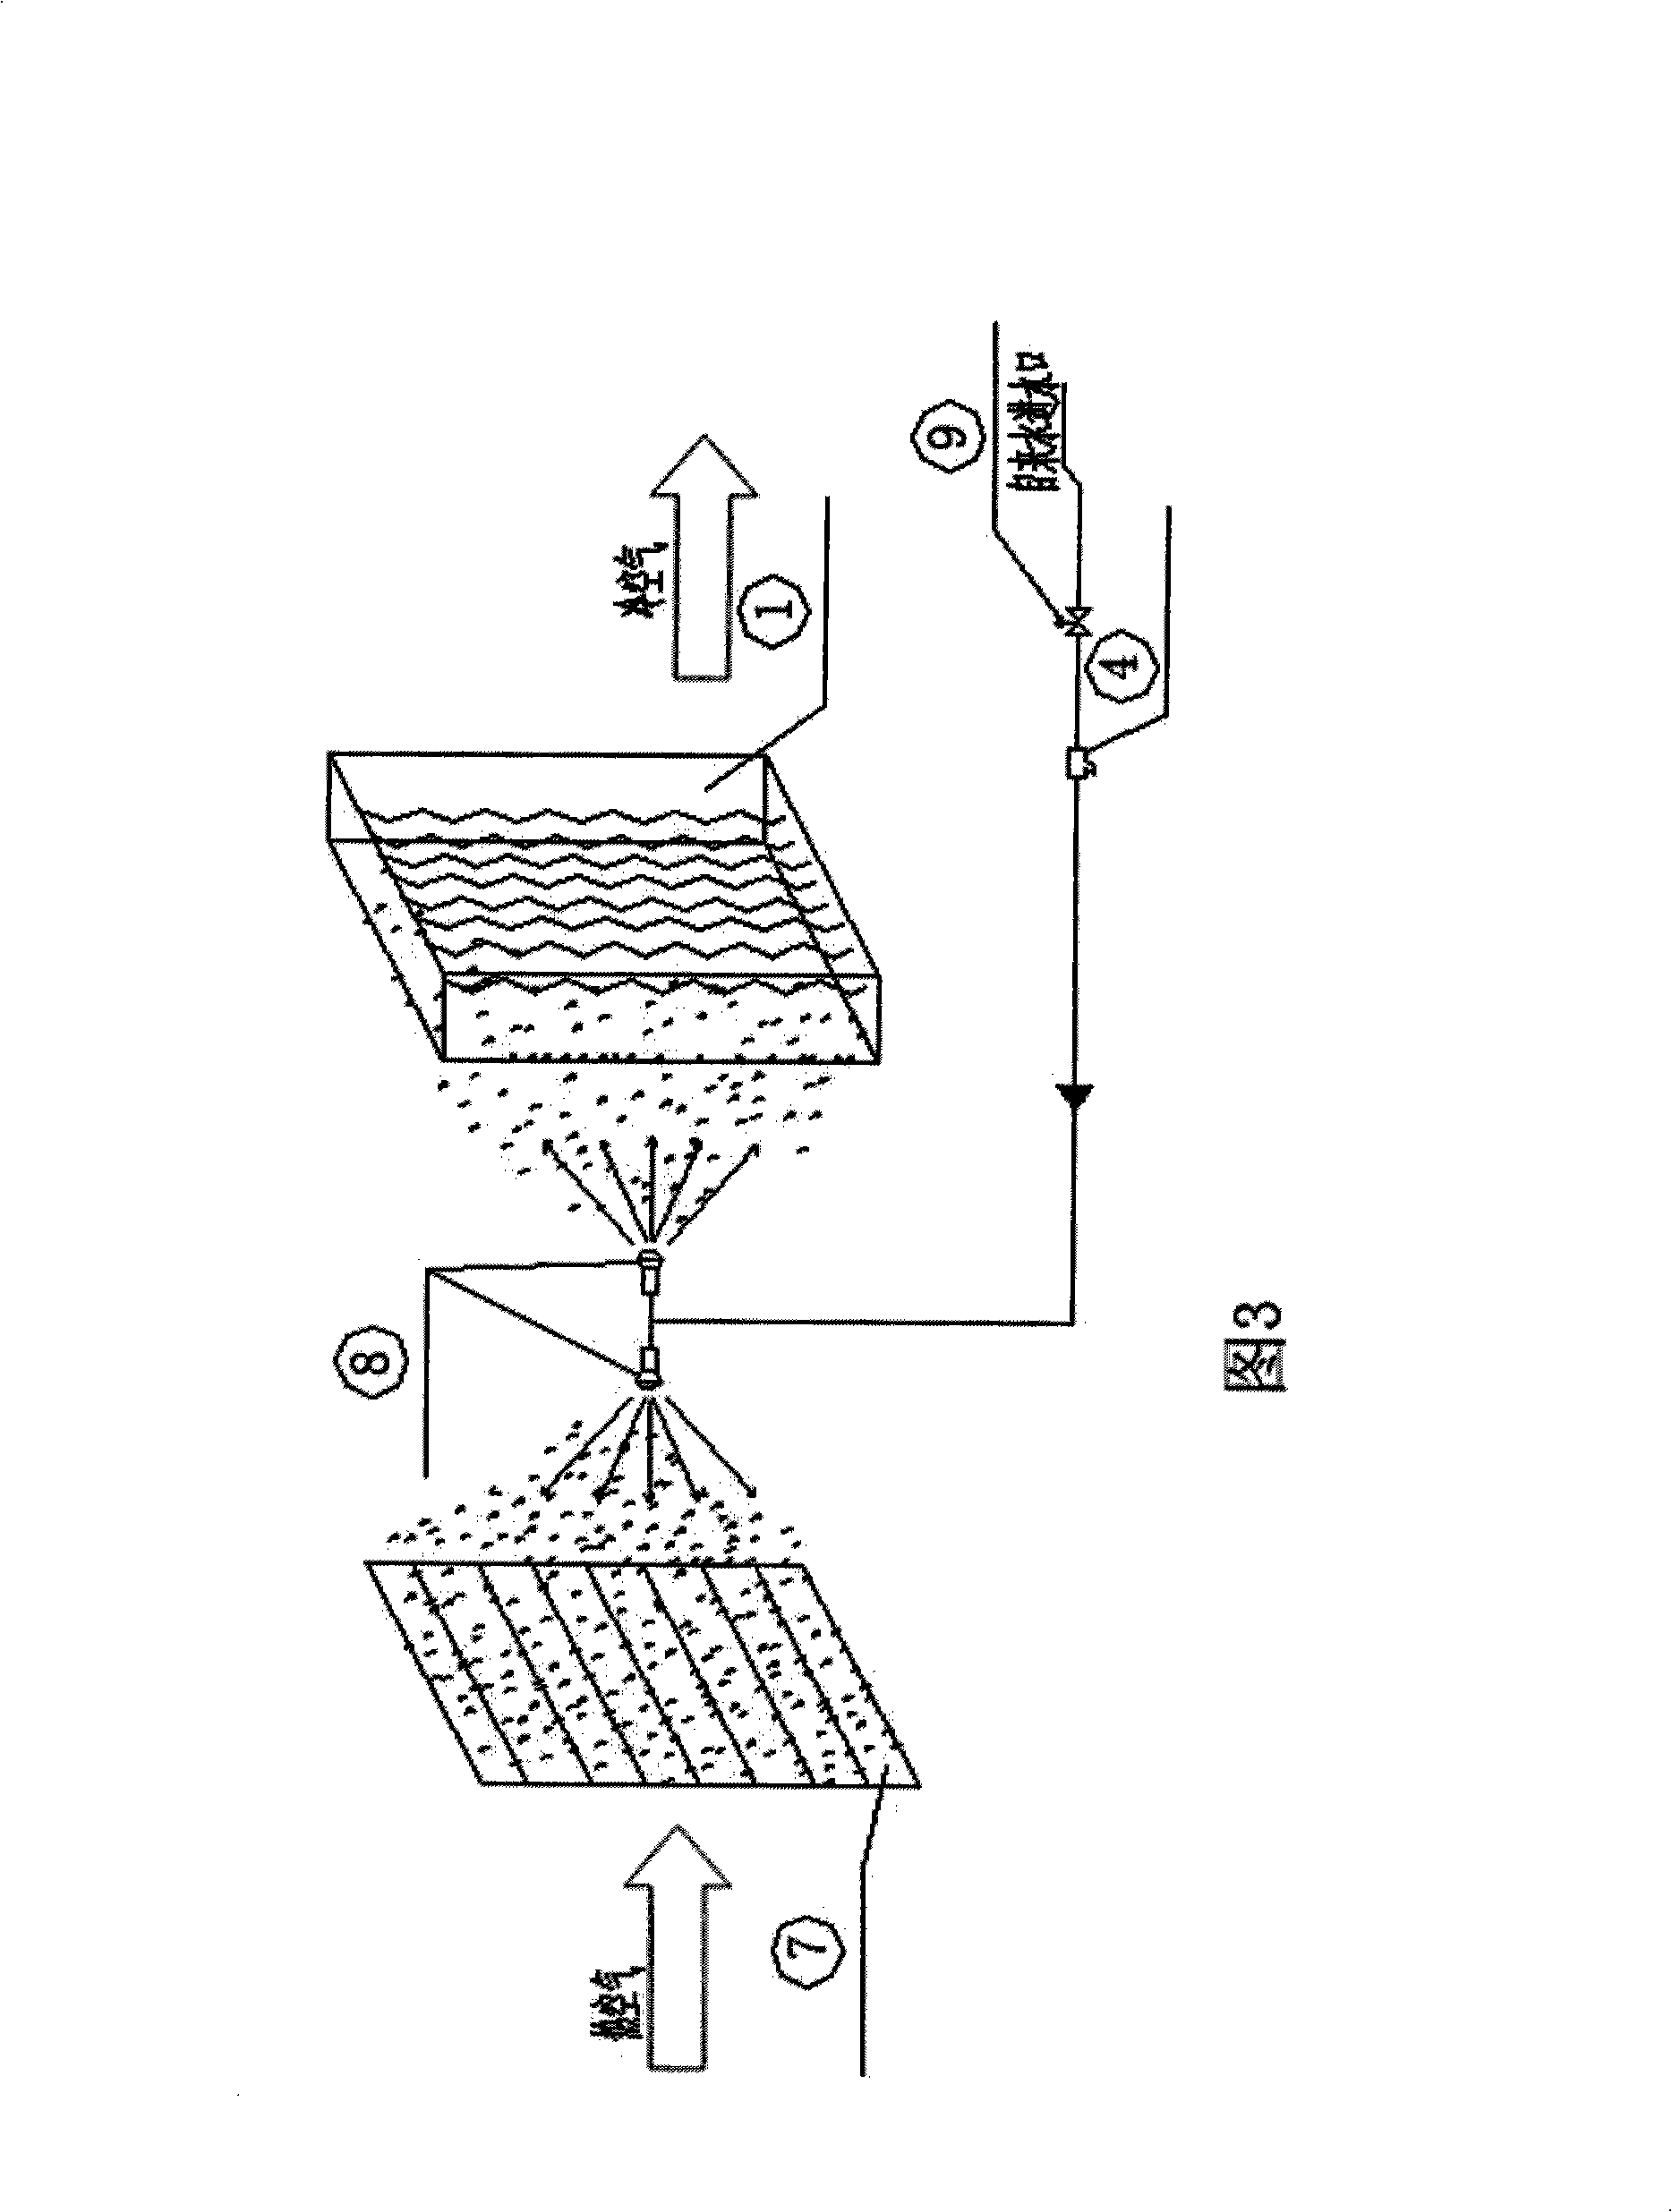 Method and apparatus for cooling air by three-stage vapour cooling